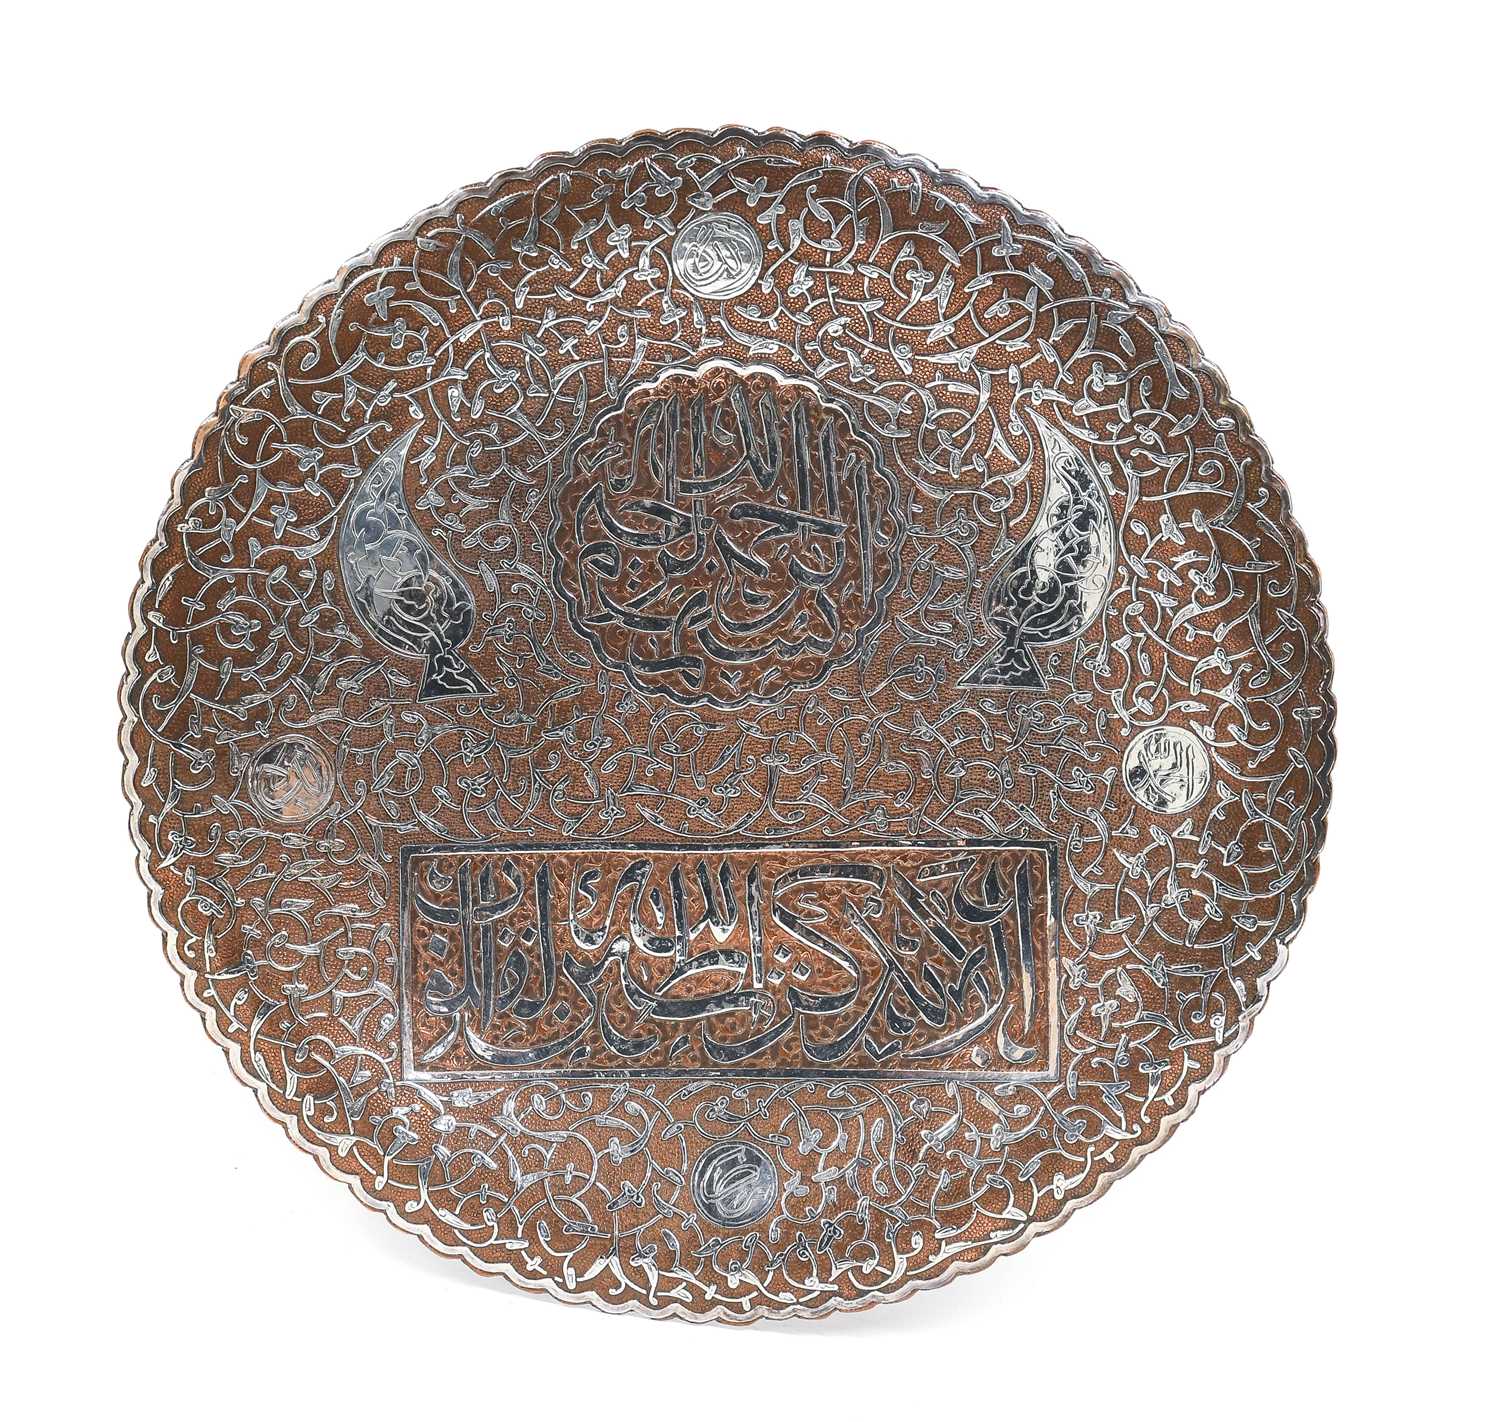 A Cairoware Circular Tray, late 19th/20th century, inlaid in copper and silver with a central - Bild 4 aus 5